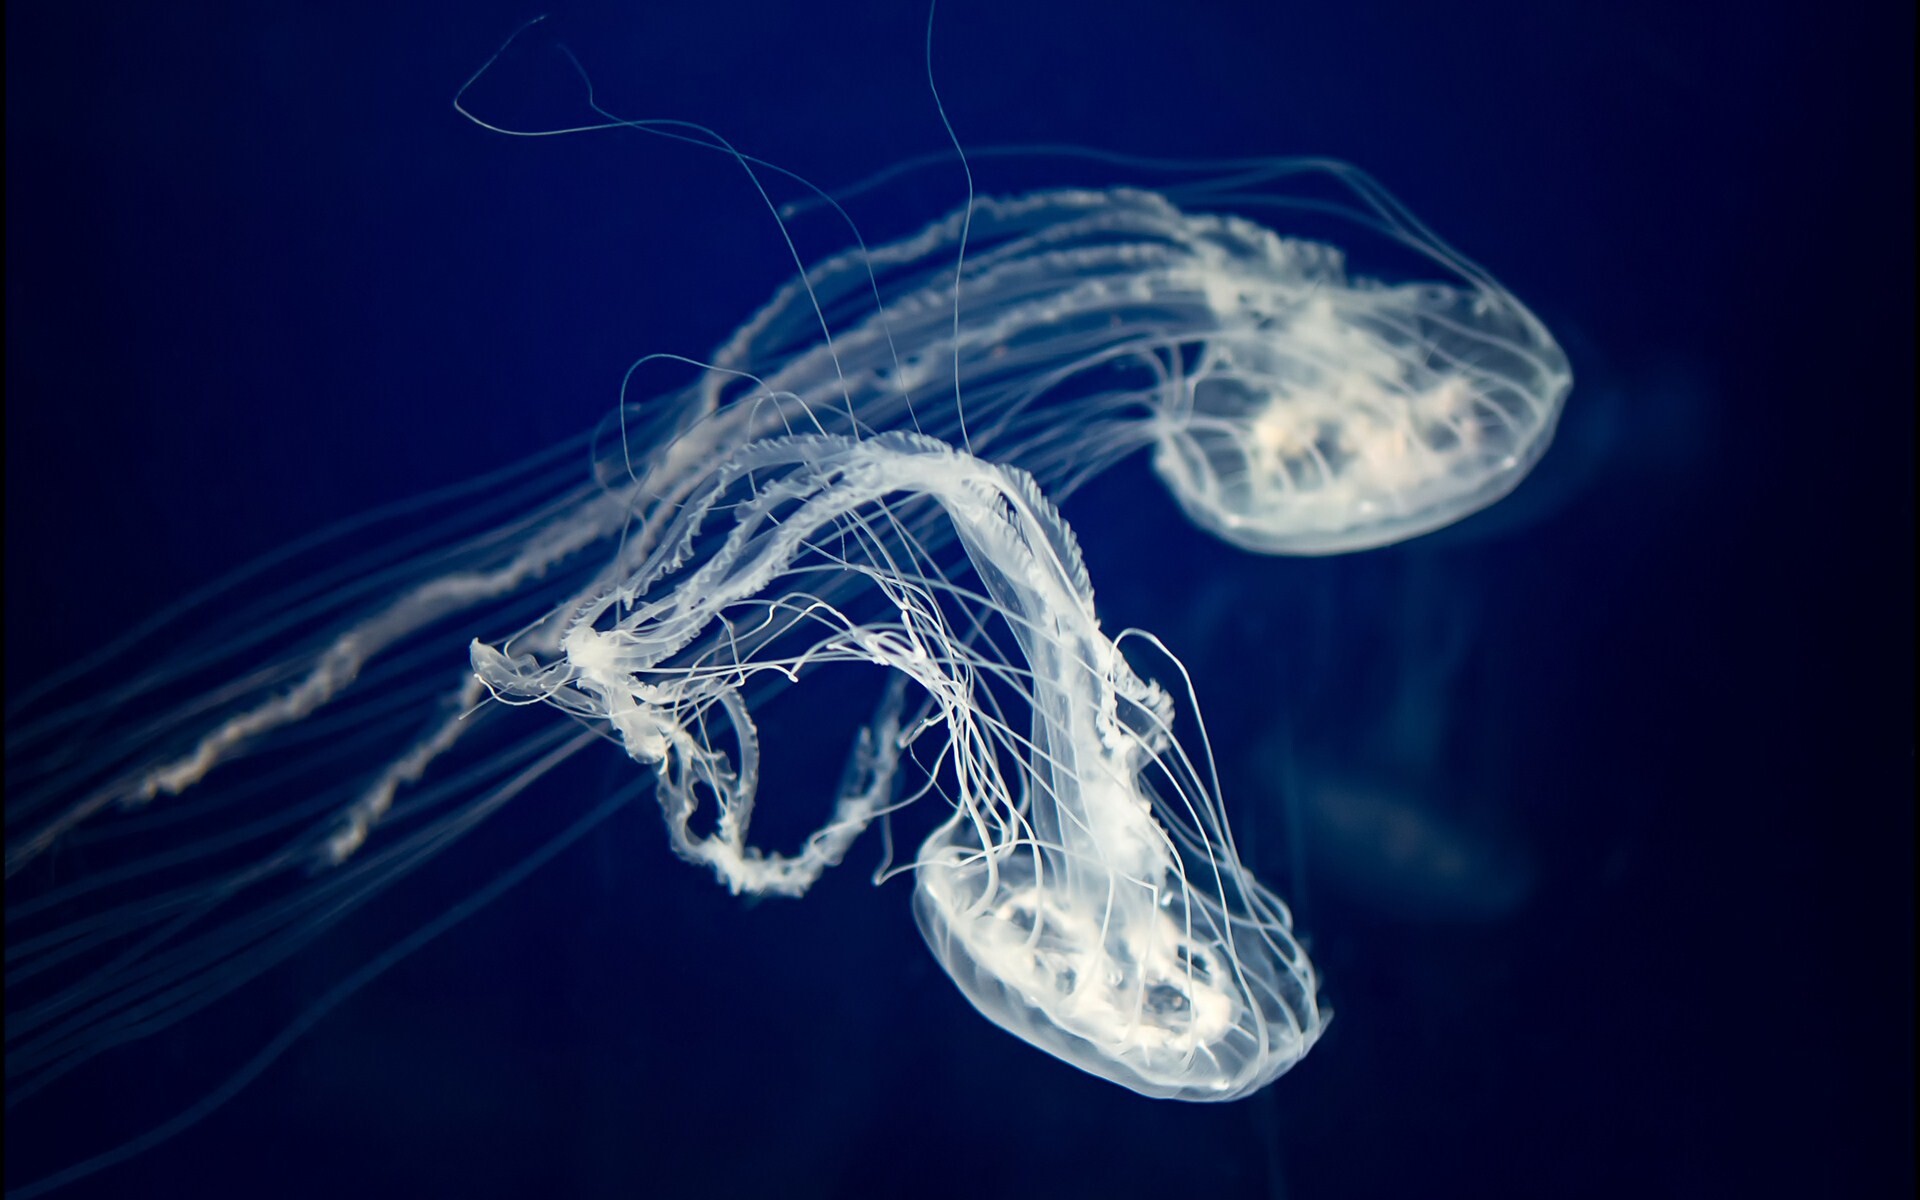 Glowing Jellyfish: Graceful and nearly transparent, The jelly with long, delicate tentacles. 1920x1200 HD Wallpaper.